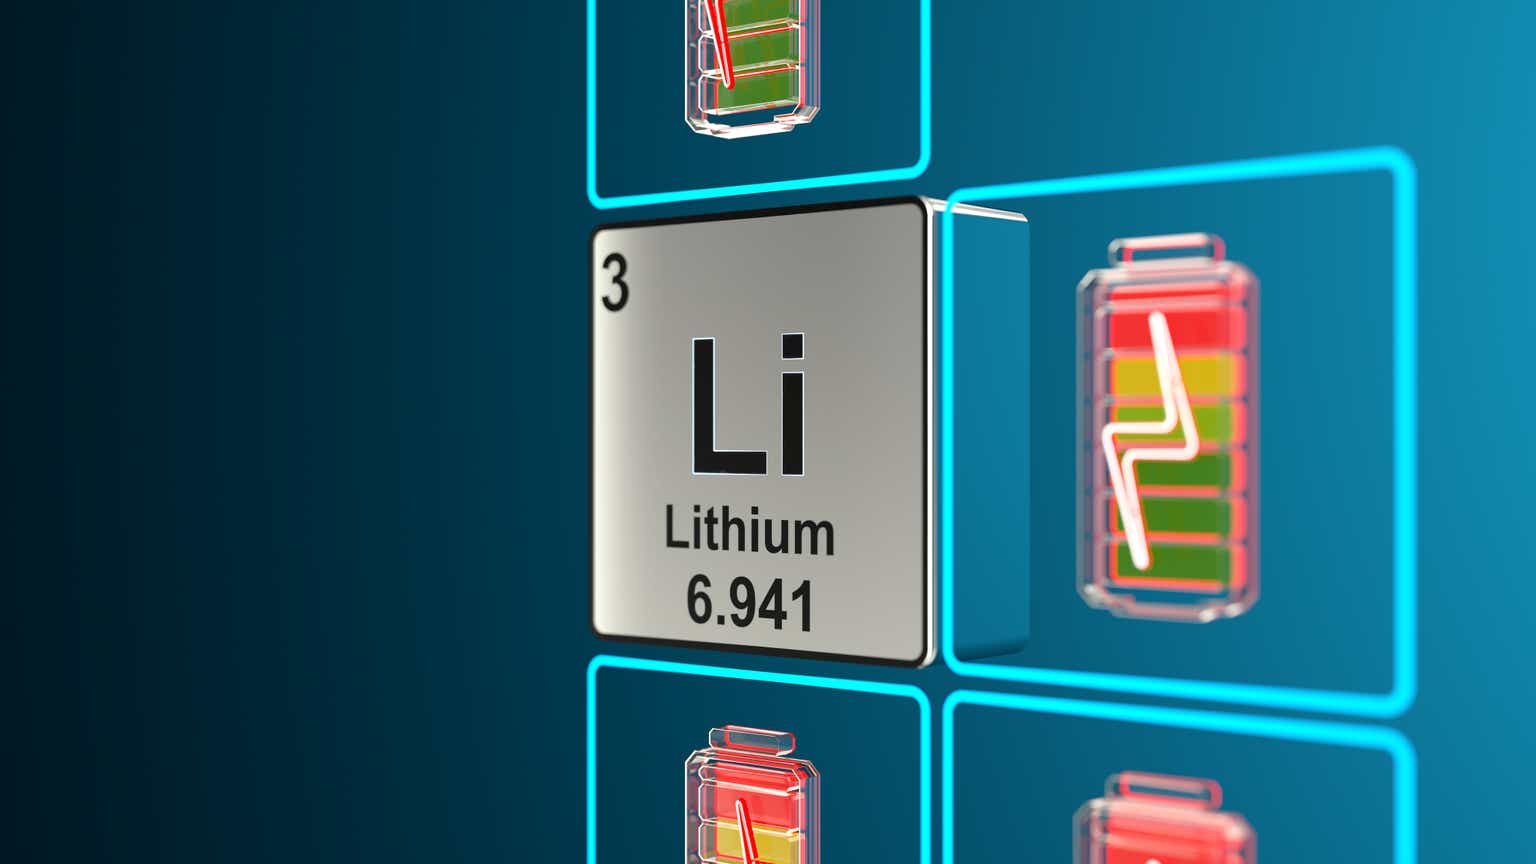 Standard Lithium: No More Than Neutral With Bleaker Li Prospects (NYSE:SLI)